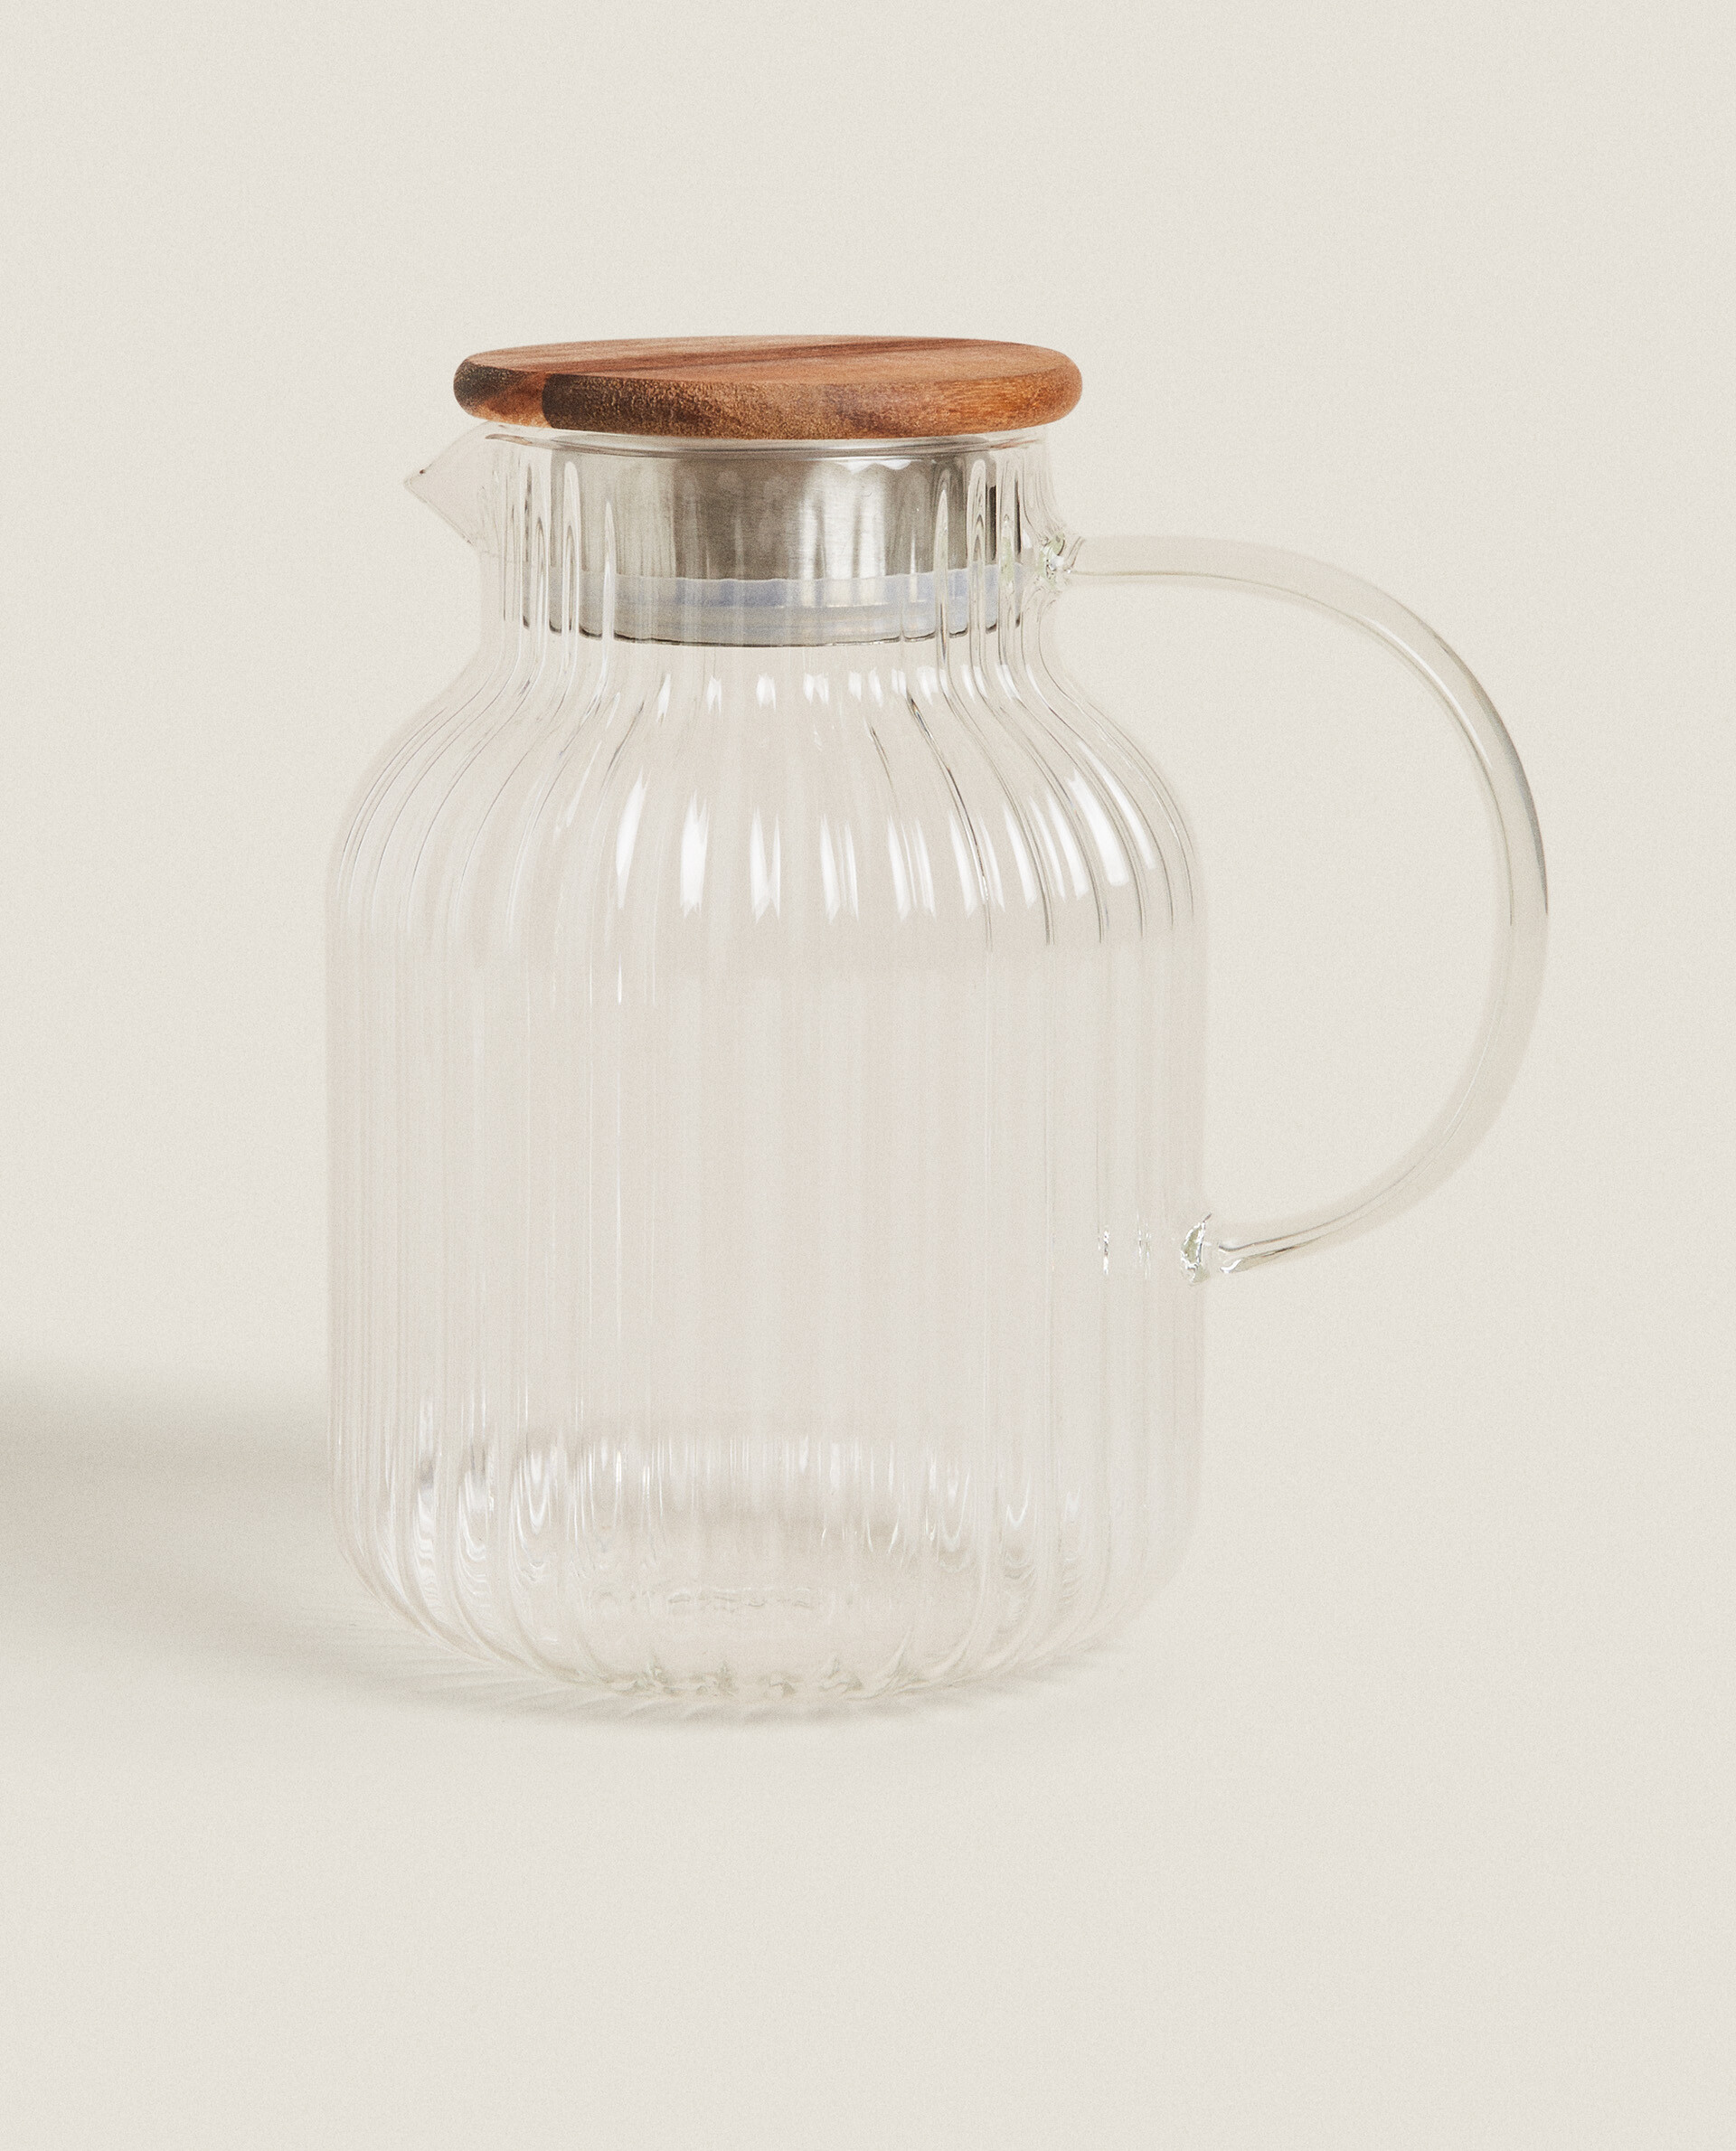 Small glass pitcher with cork stopper